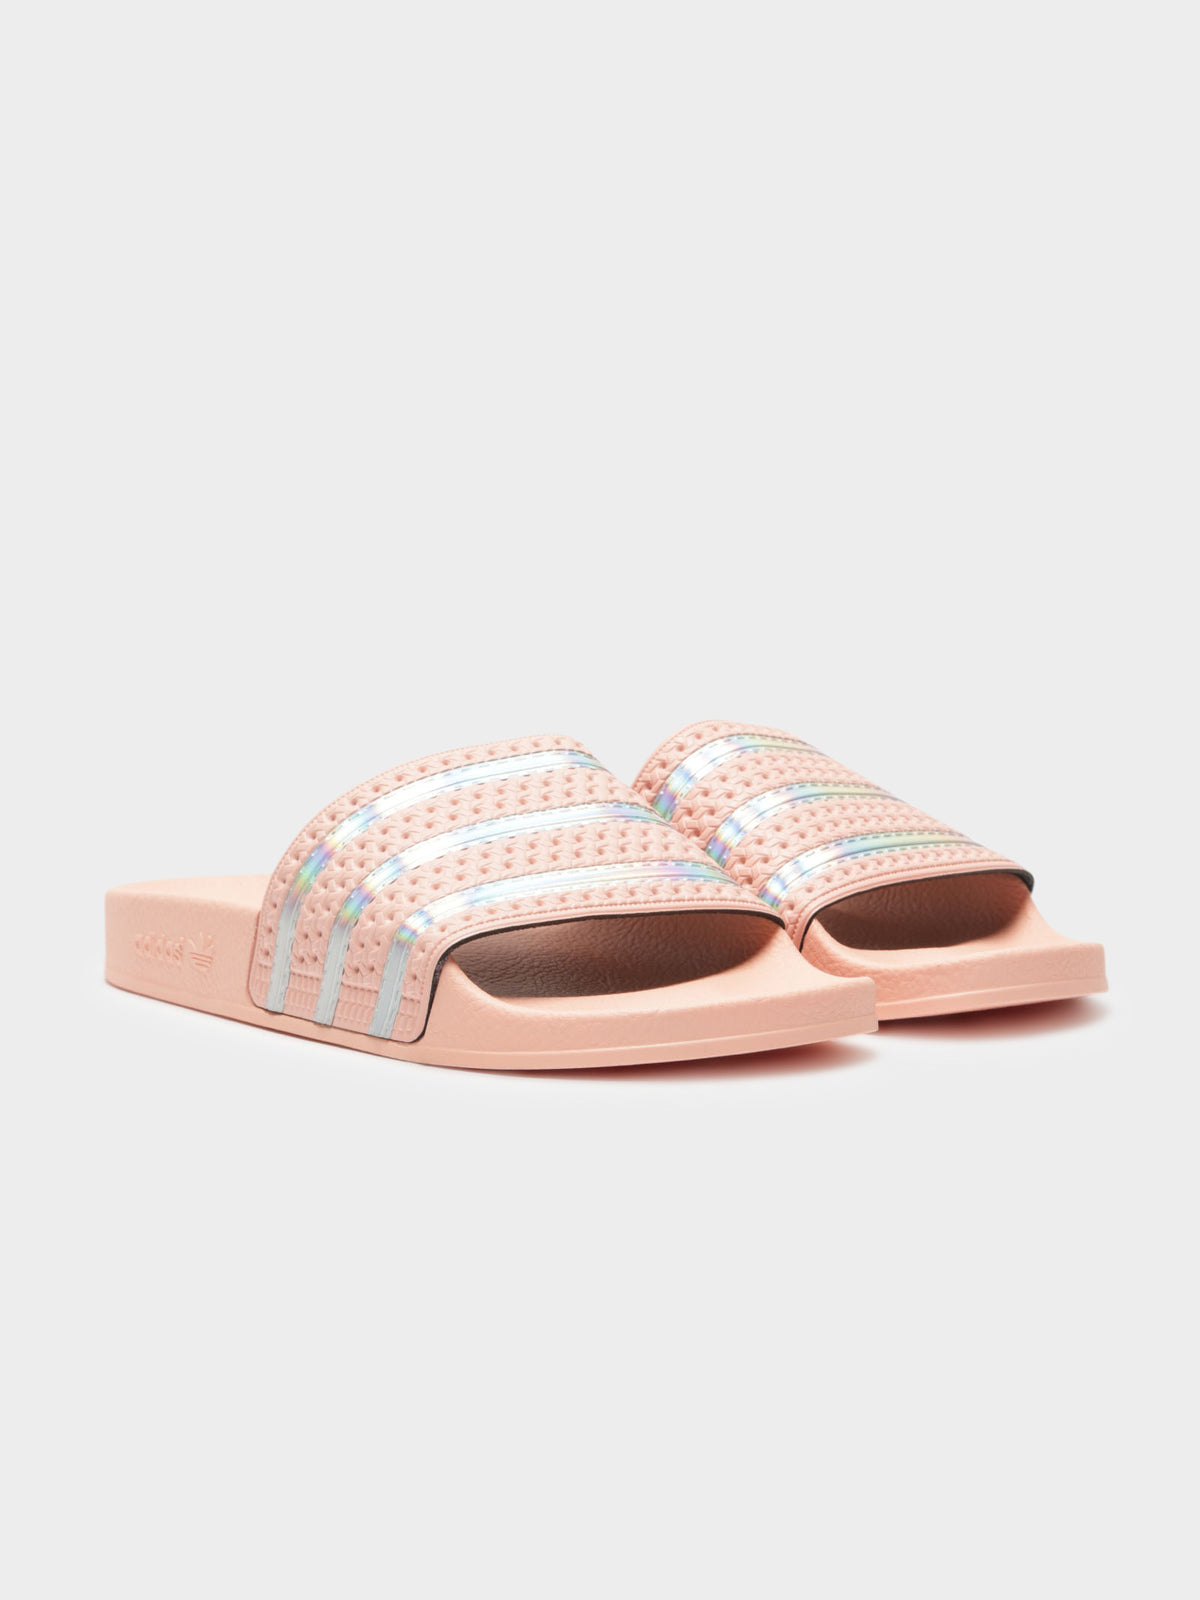 Womens Adilette Slides in Coral Pink &amp; Iridescence